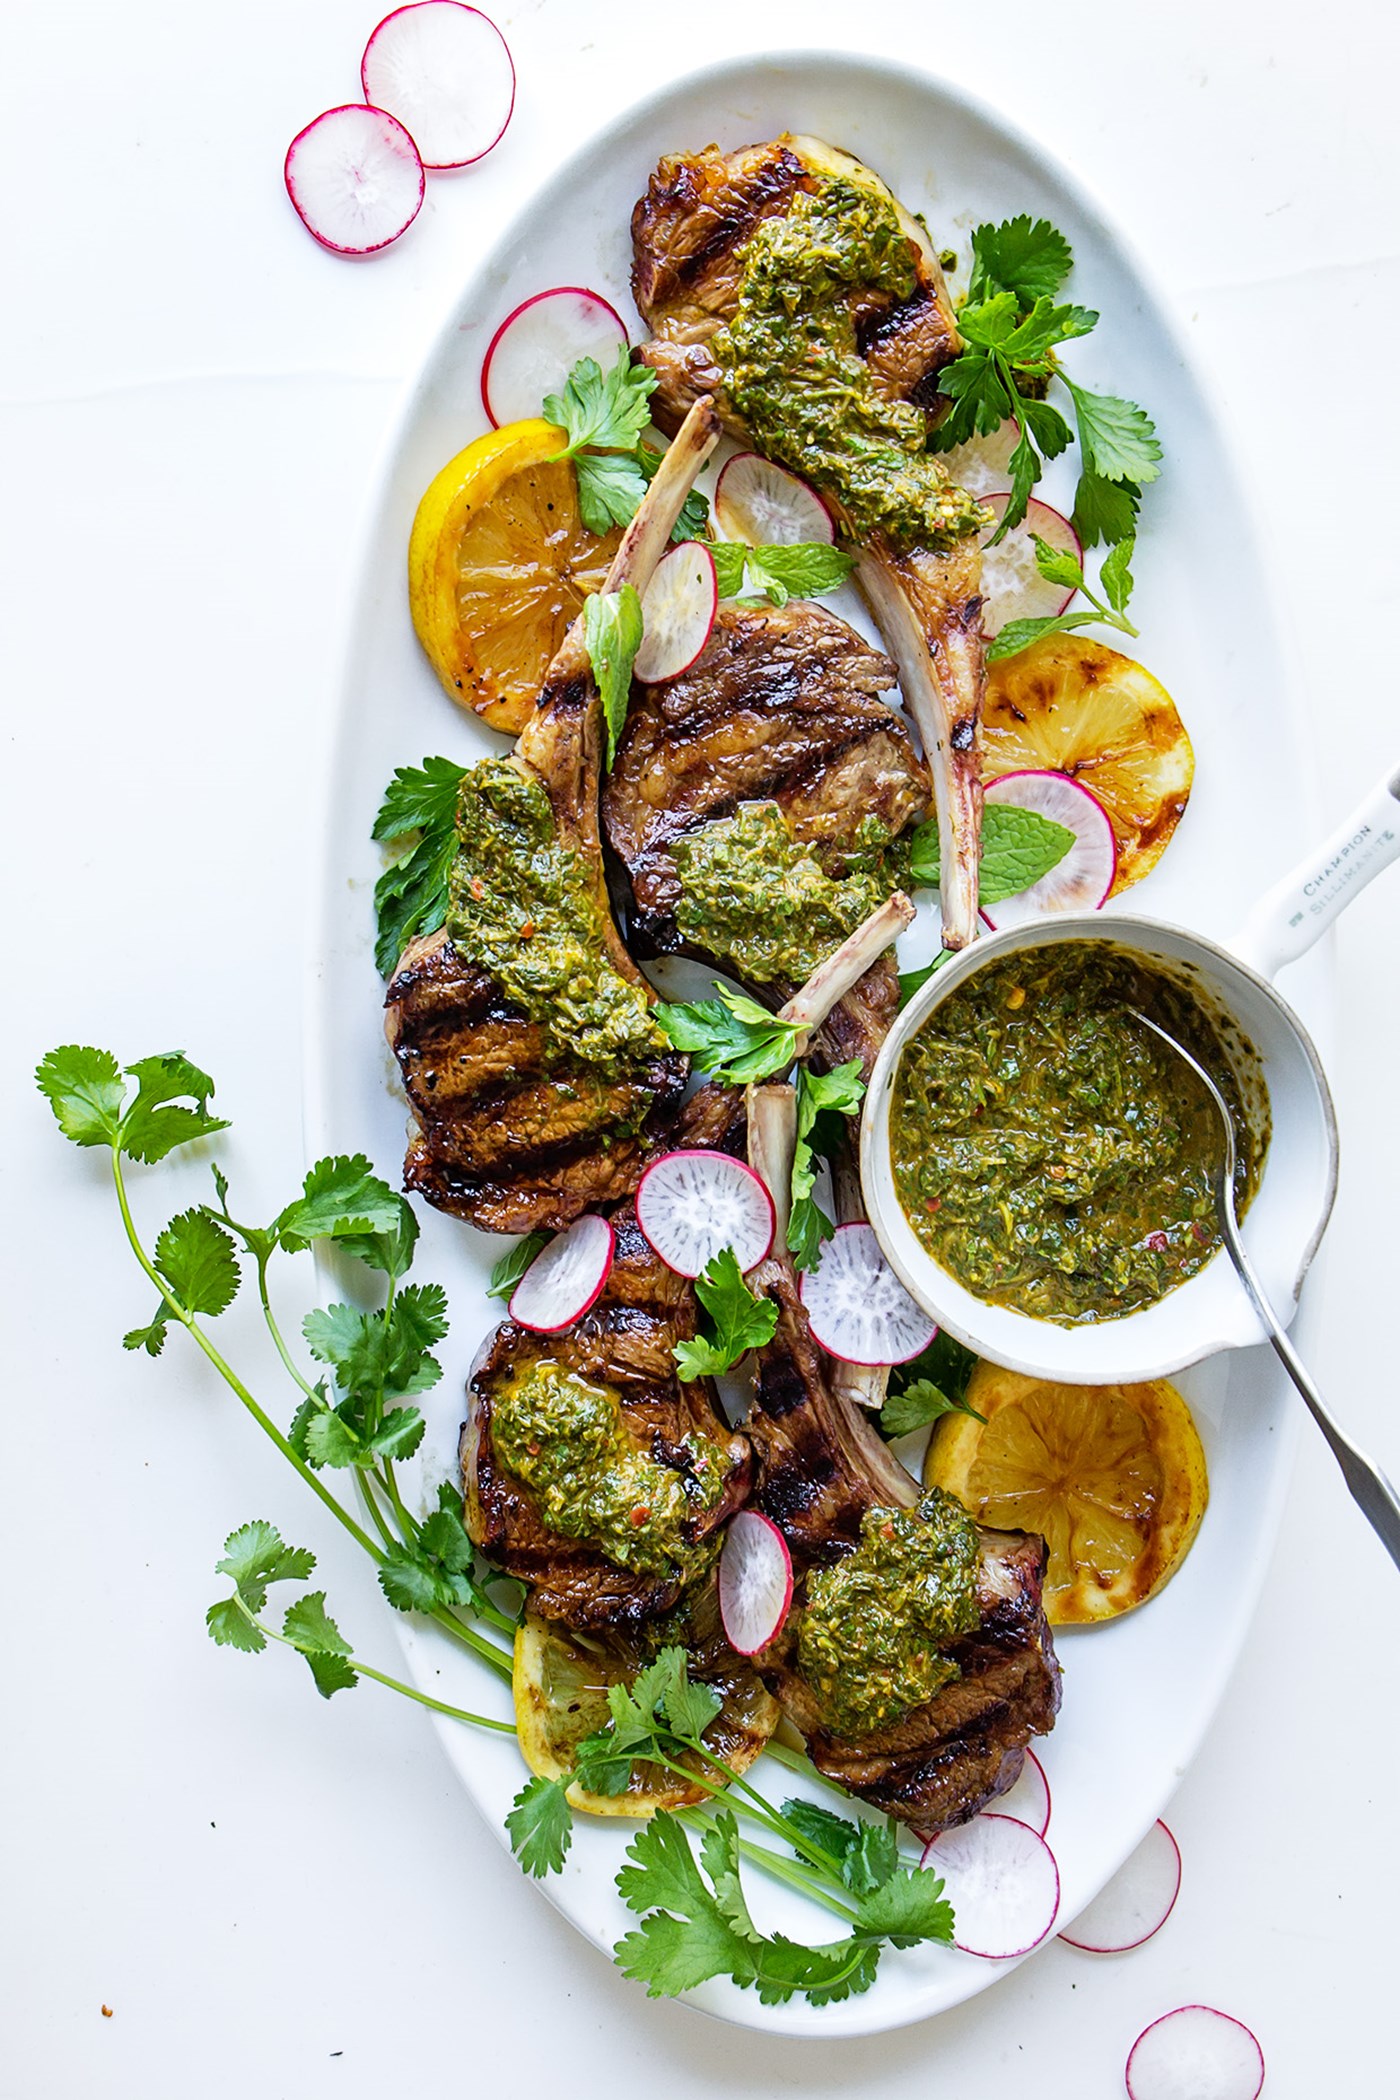 Grilled Lamb Chops, Real Food by Dad with Matt Robinson